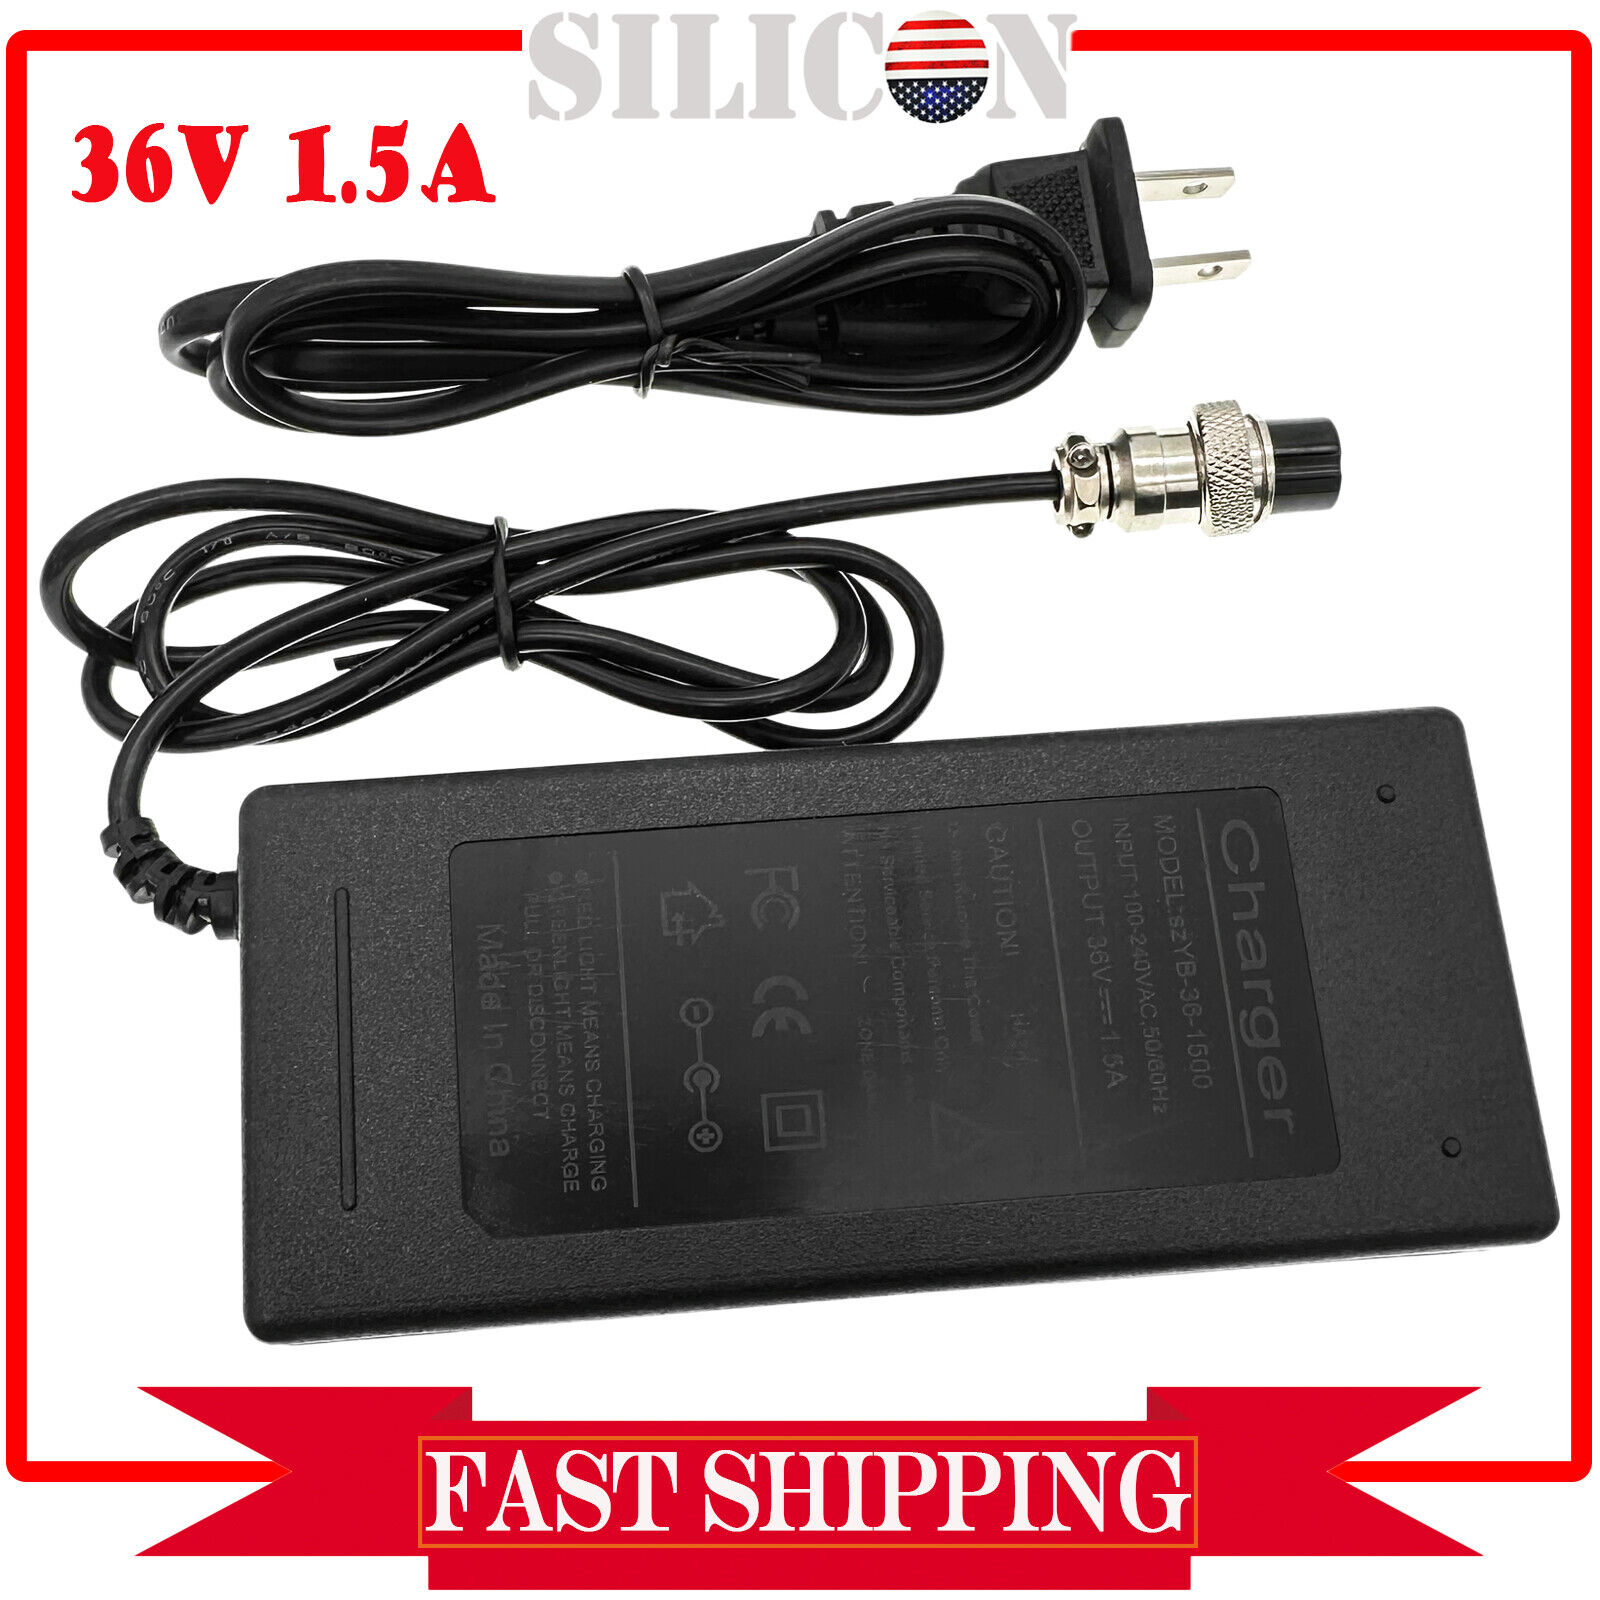 New 36V 1.5A Scooter Battery Charger For Freedom 945 959 City Express E-Scooter New 36V 1.5A Scooter Battery Charger Fo